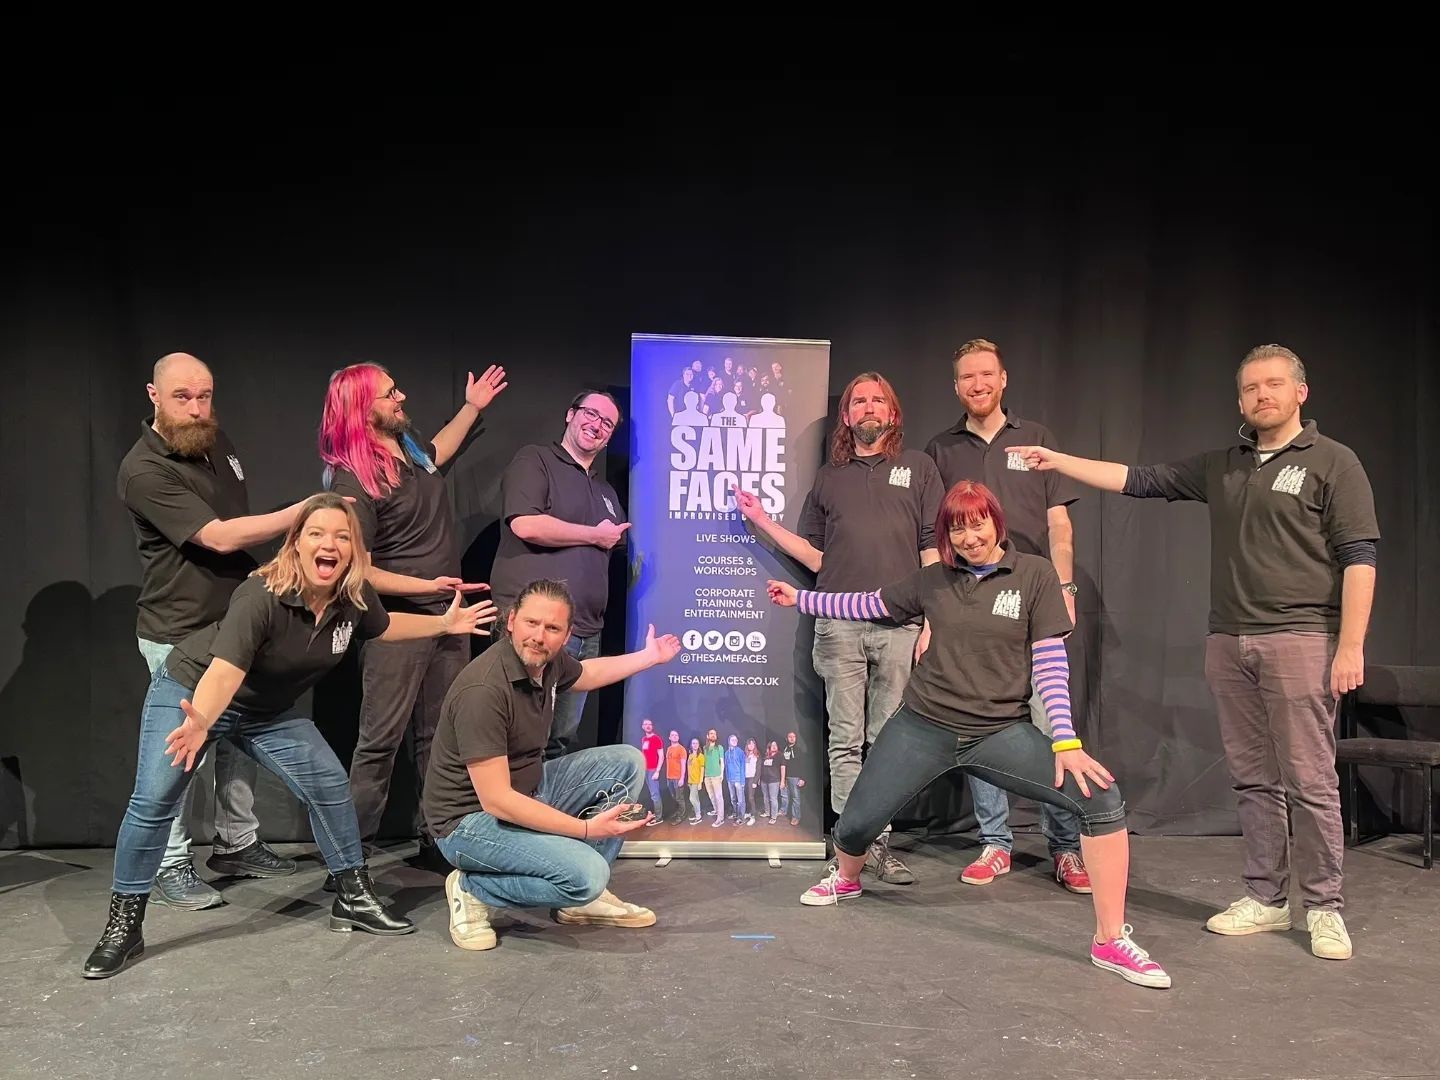 Improv comedians performing standup comedy on stage at a gig